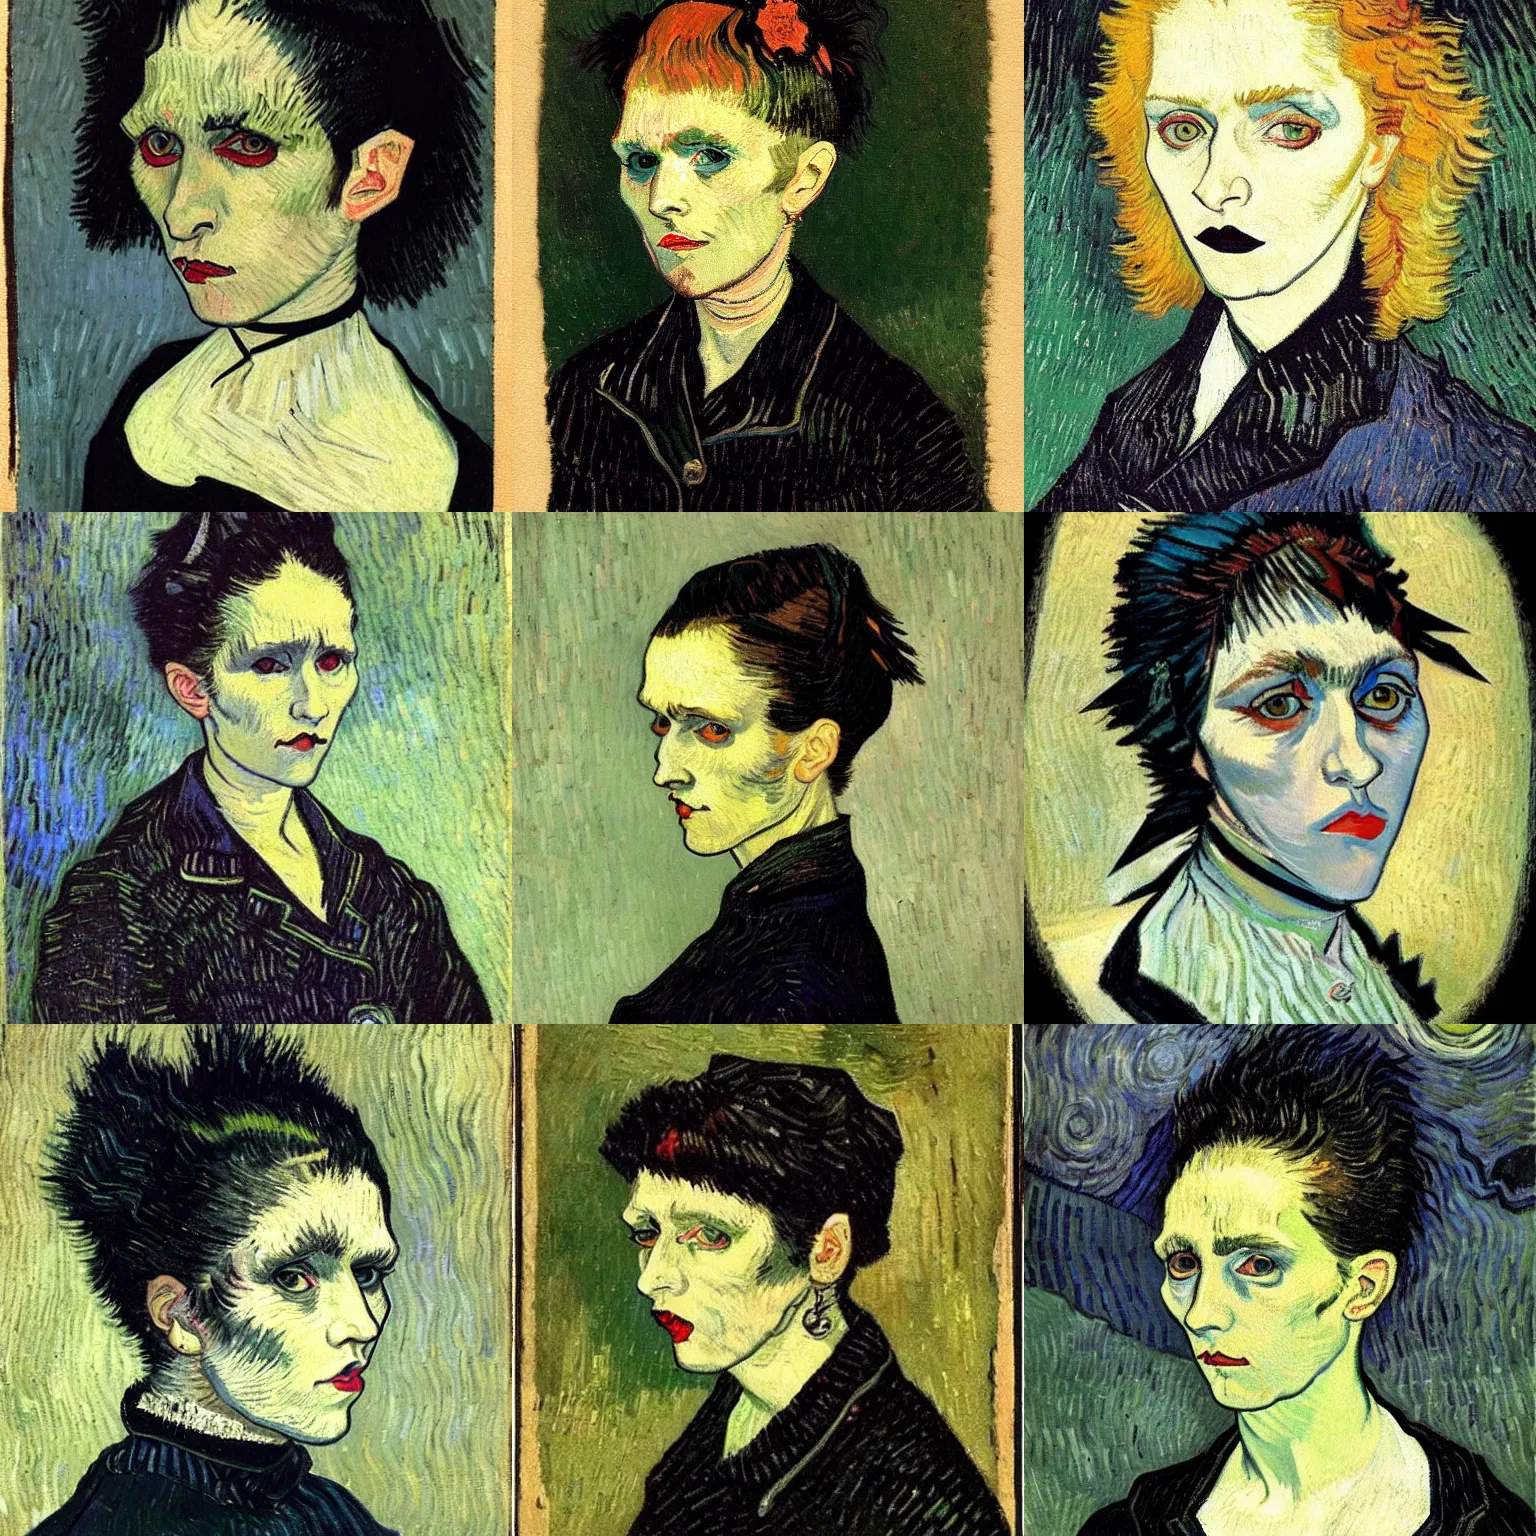 Prompt: A goth portrait painted by Vincent van Gogh. Her hair is dark brown and cut into a short, messy pixie cut. She has a slightly rounded face, with a pointed chin, large entirely-black eyes, and a small nose. She is wearing a black tank top, a black leather jacket, a black knee-length skirt, a black choker, and black leather boots.